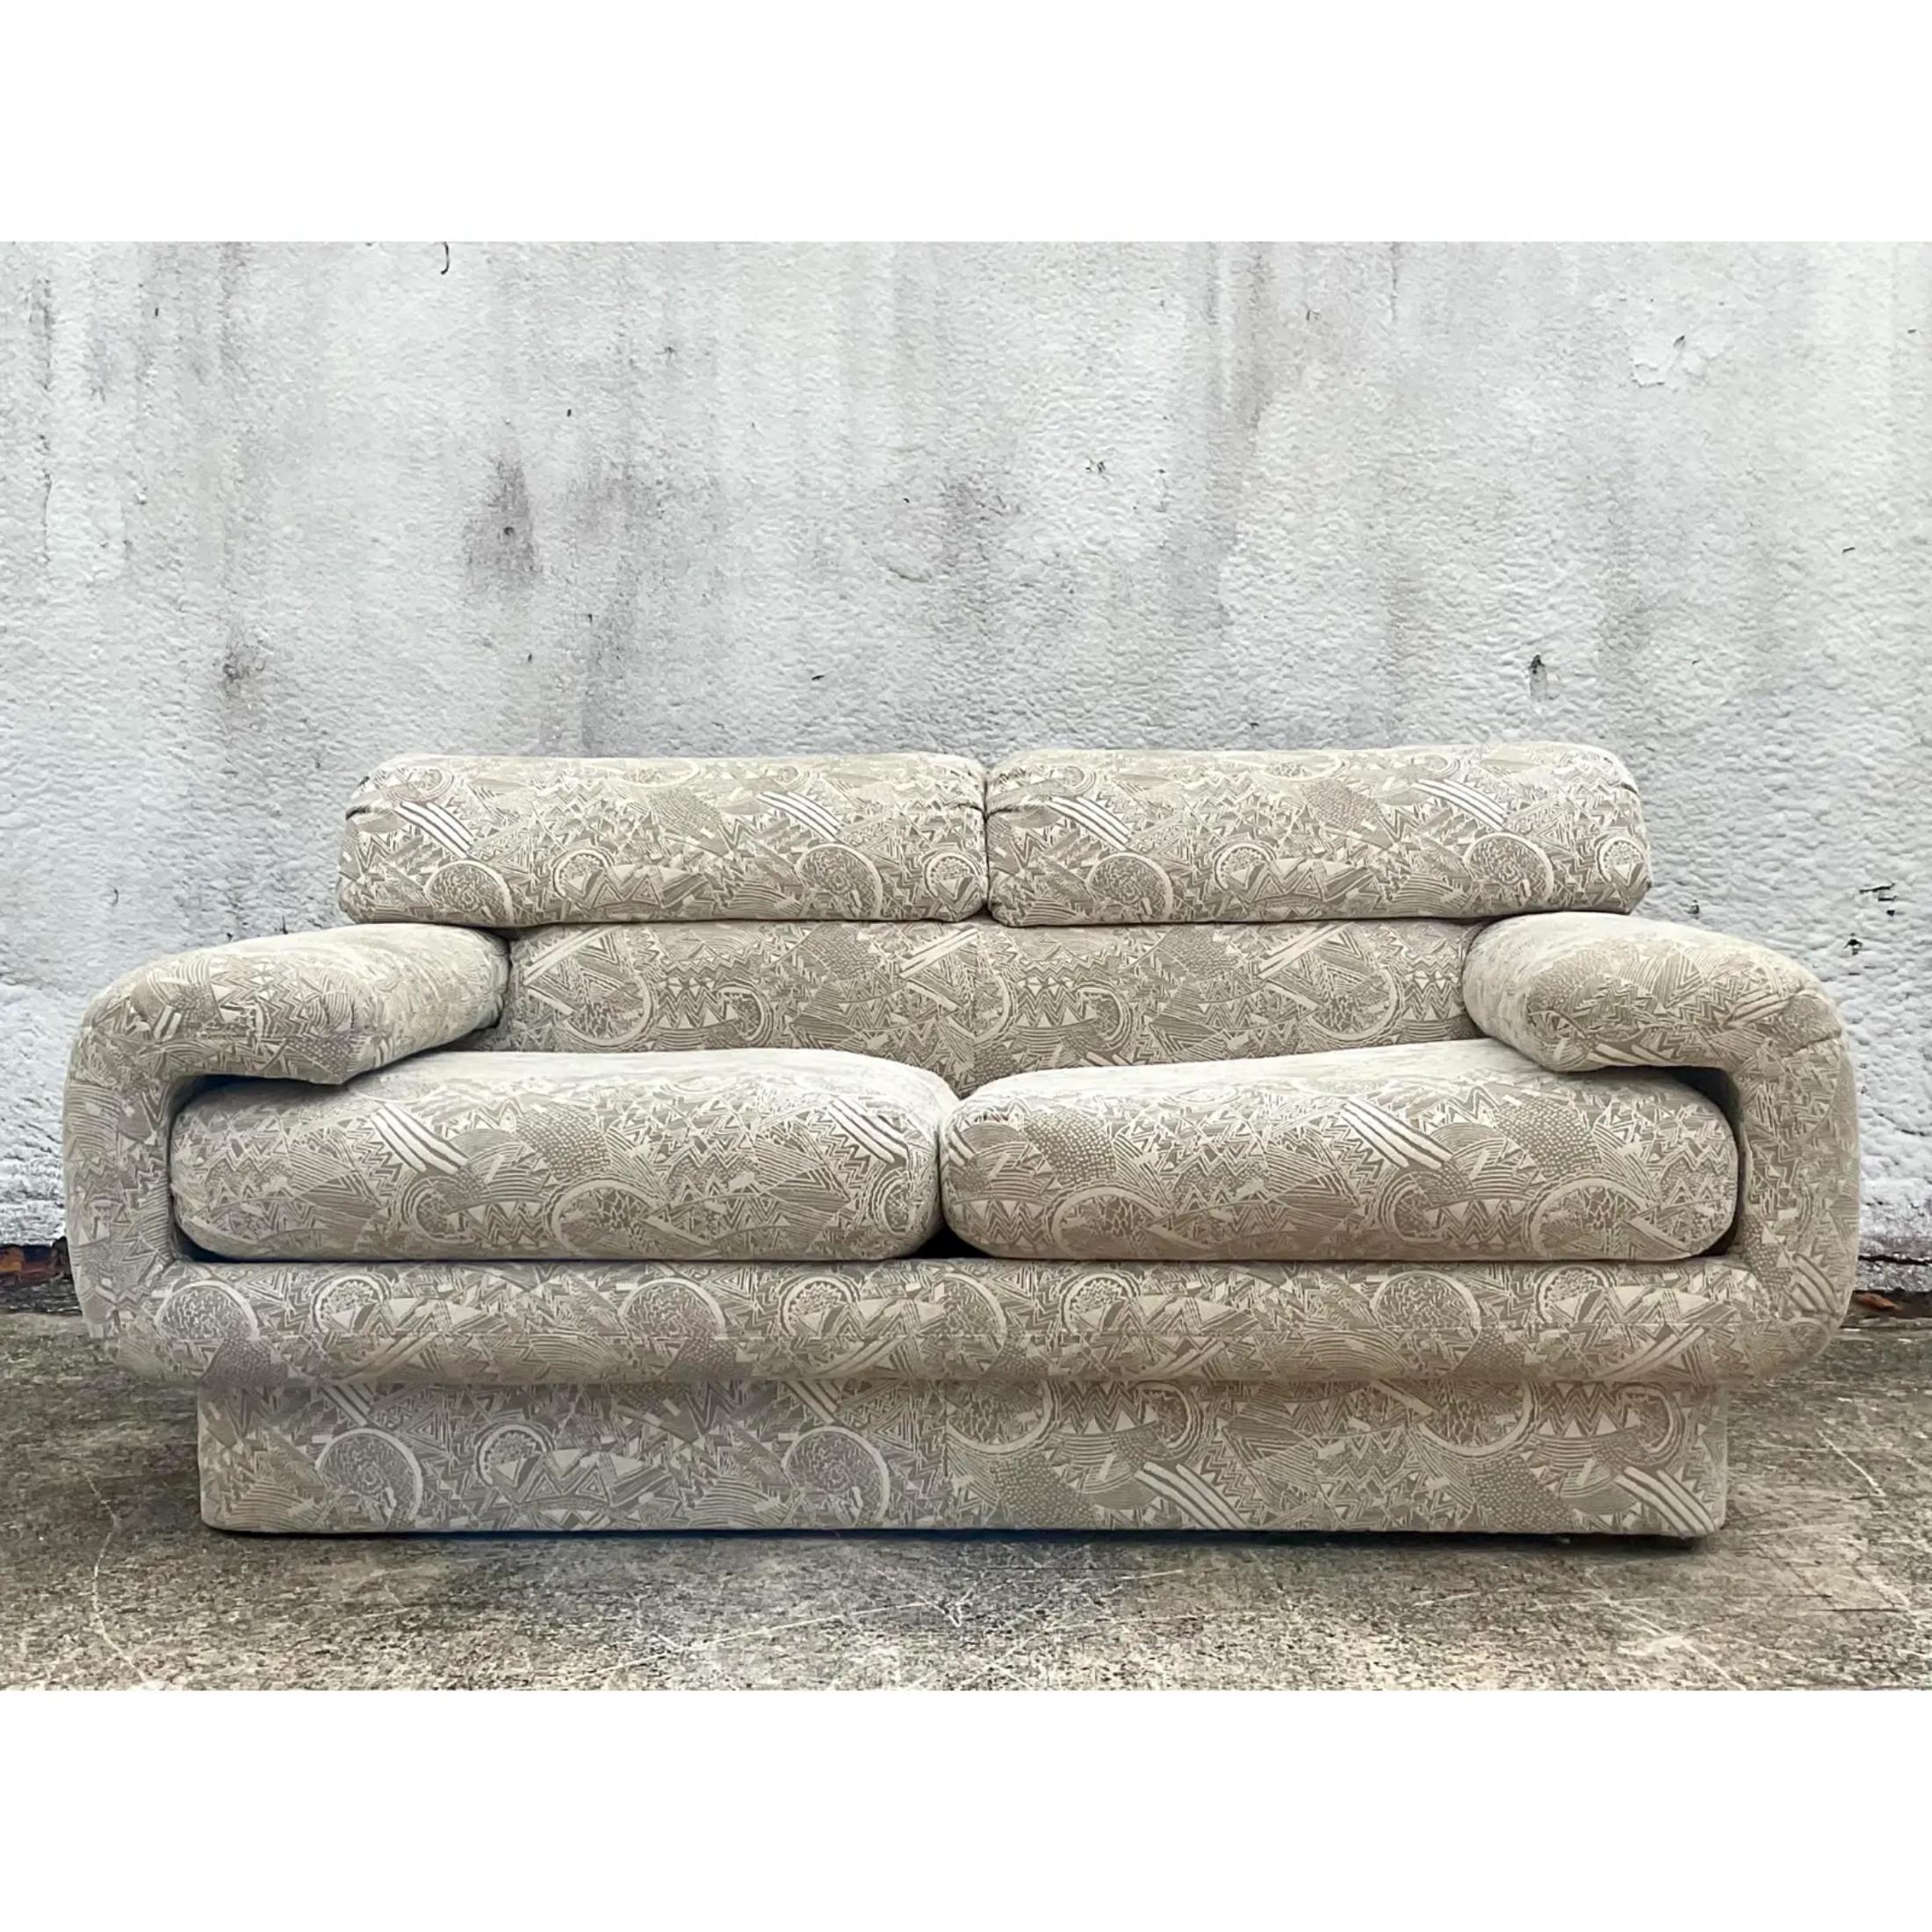 Incredible vintage Carson’s Gondola sofa. A chic futuristic design with wrap around arms. Done in a neutral jacquard in a modern graphic paisley design. Acquired from a Palm Beach estate.